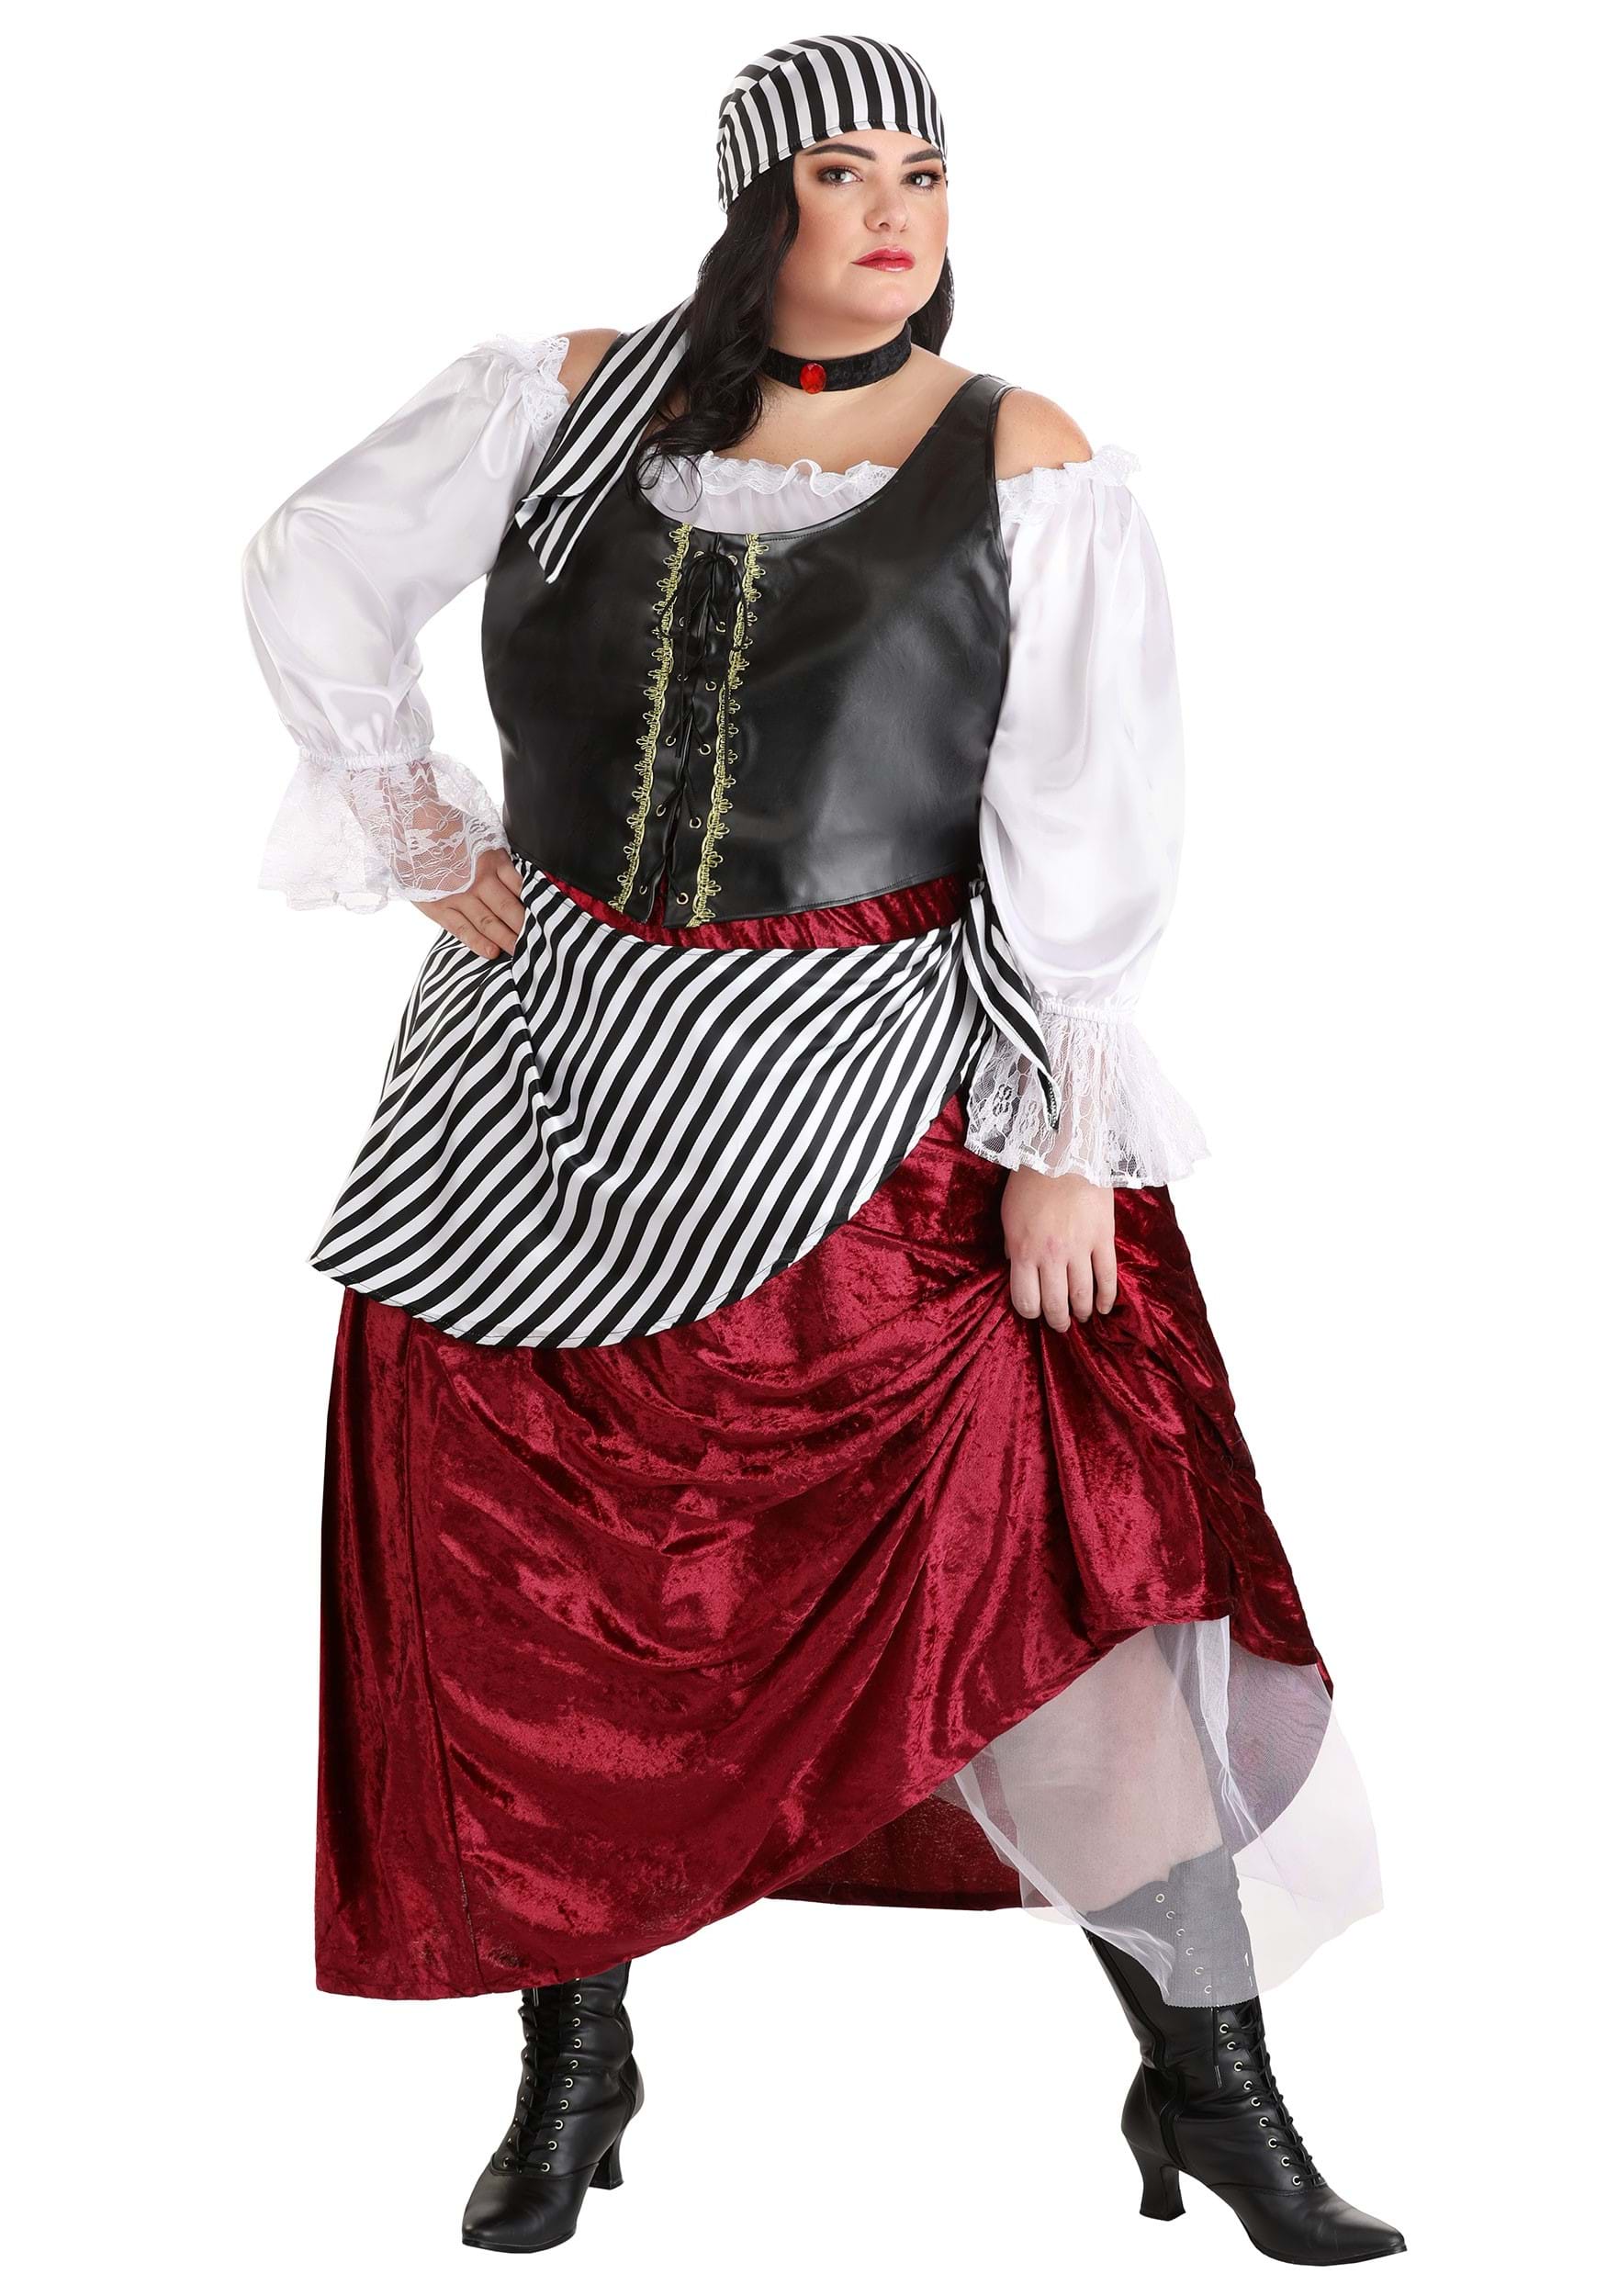 Photos - Fancy Dress Deluxe FUN Costumes  Pirate Wench Plus Size Costume for Women | Pirate Dres 